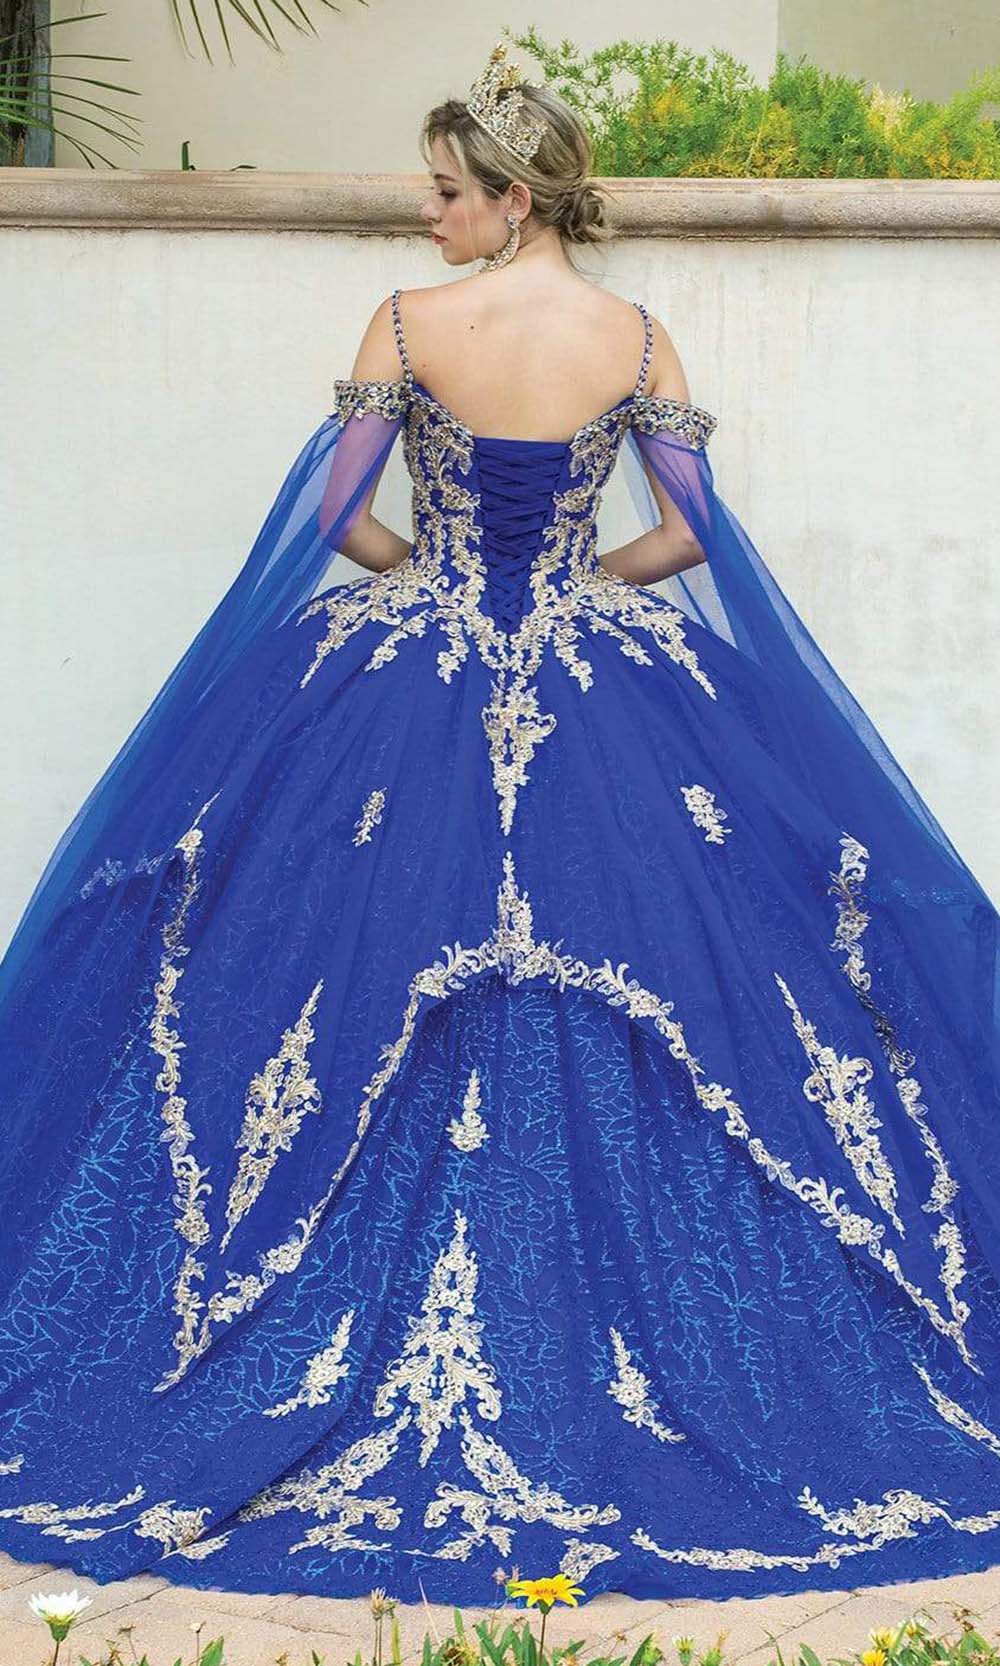 Delicate Sparkly Beading Ball Gown Satin Royal Blue Prom, 45% OFF